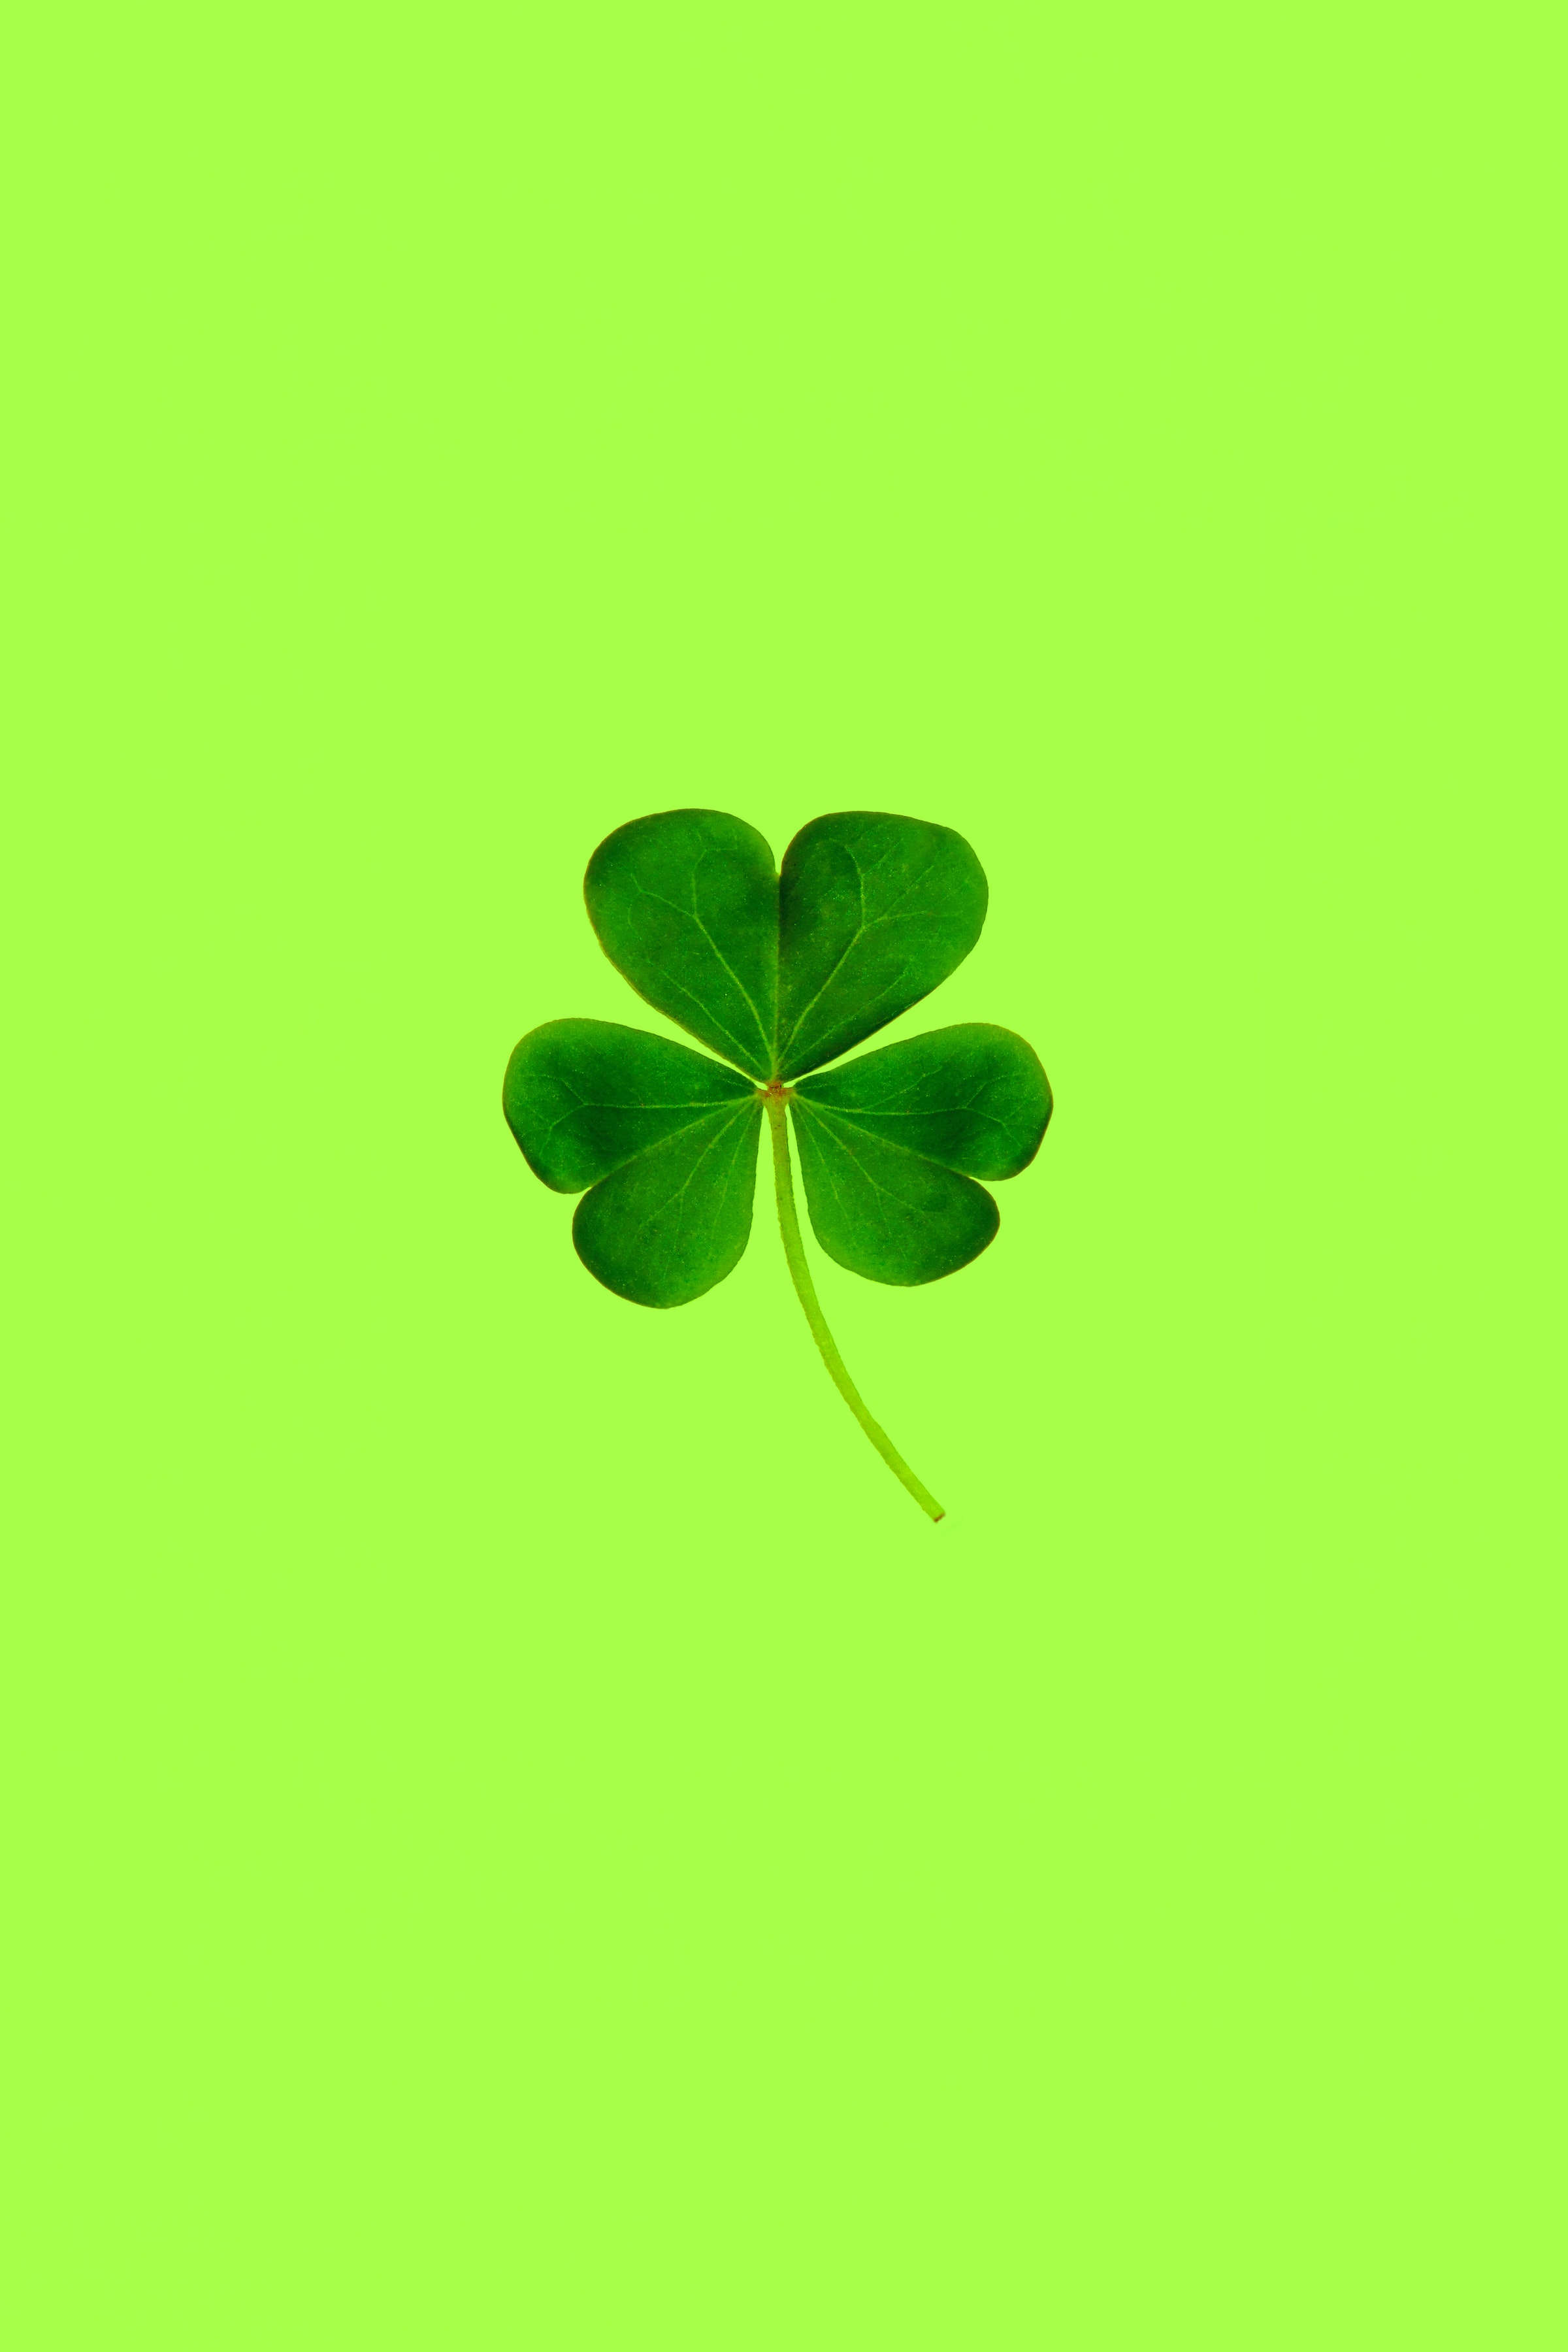 140971 free wallpaper 2160x3840 for phone, download images clover, macro, leaflet, green 2160x3840 for mobile